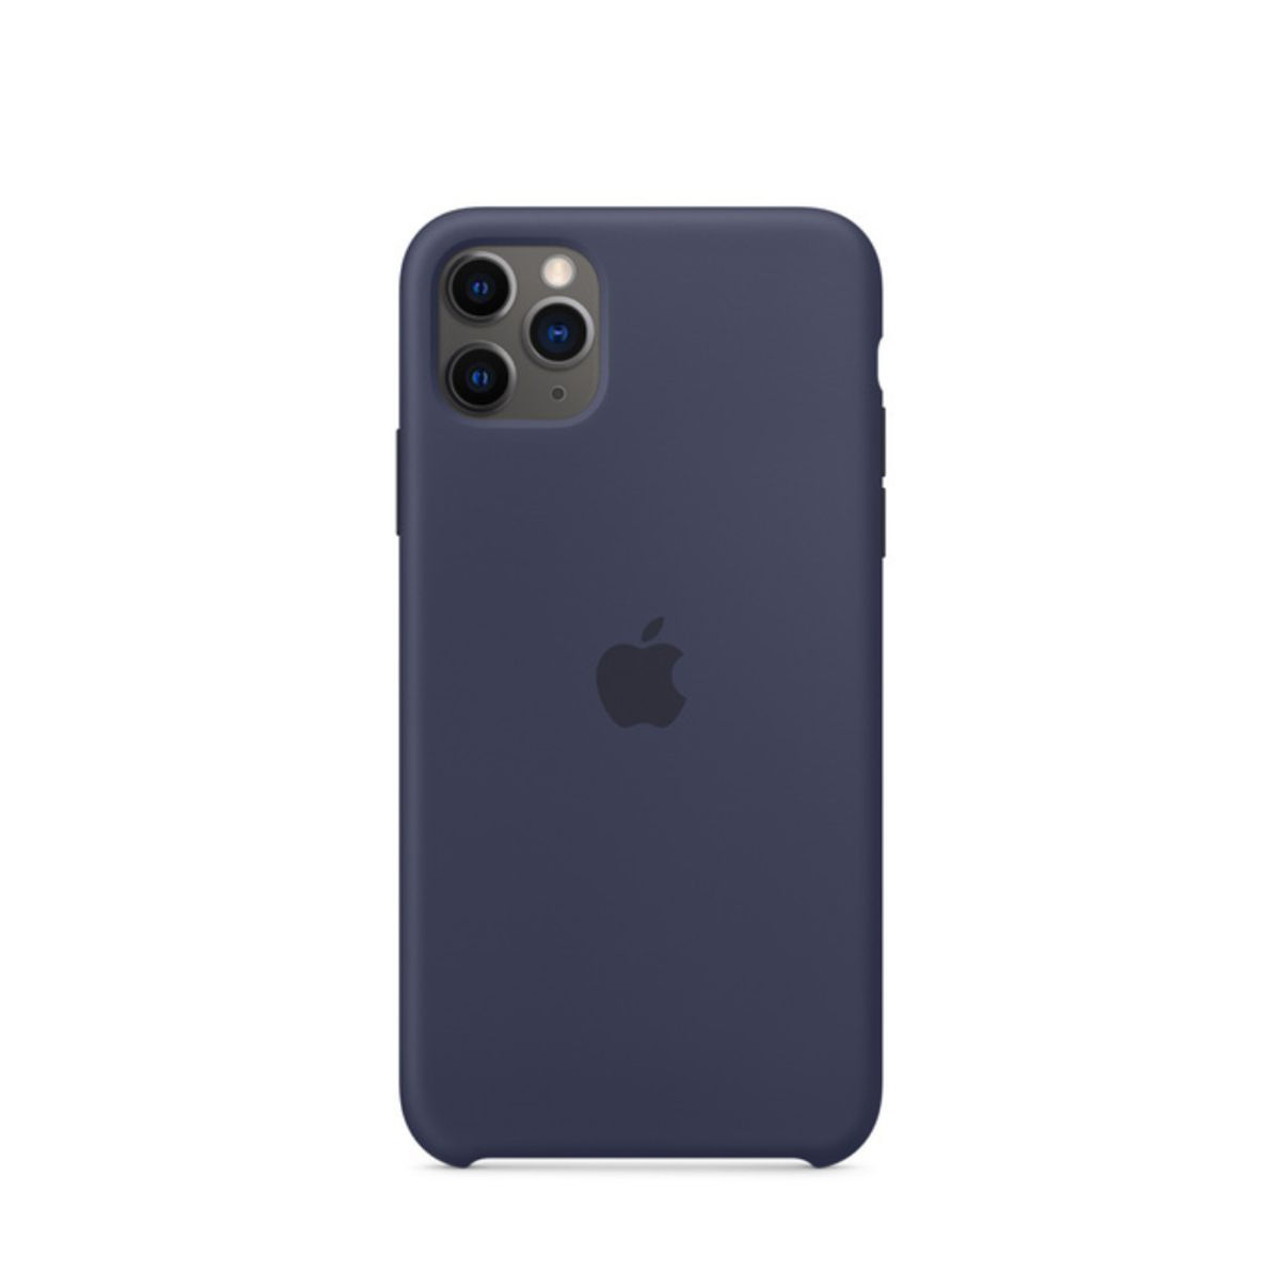 Apple Silcone Case for iPhone 11 Pro Max product image